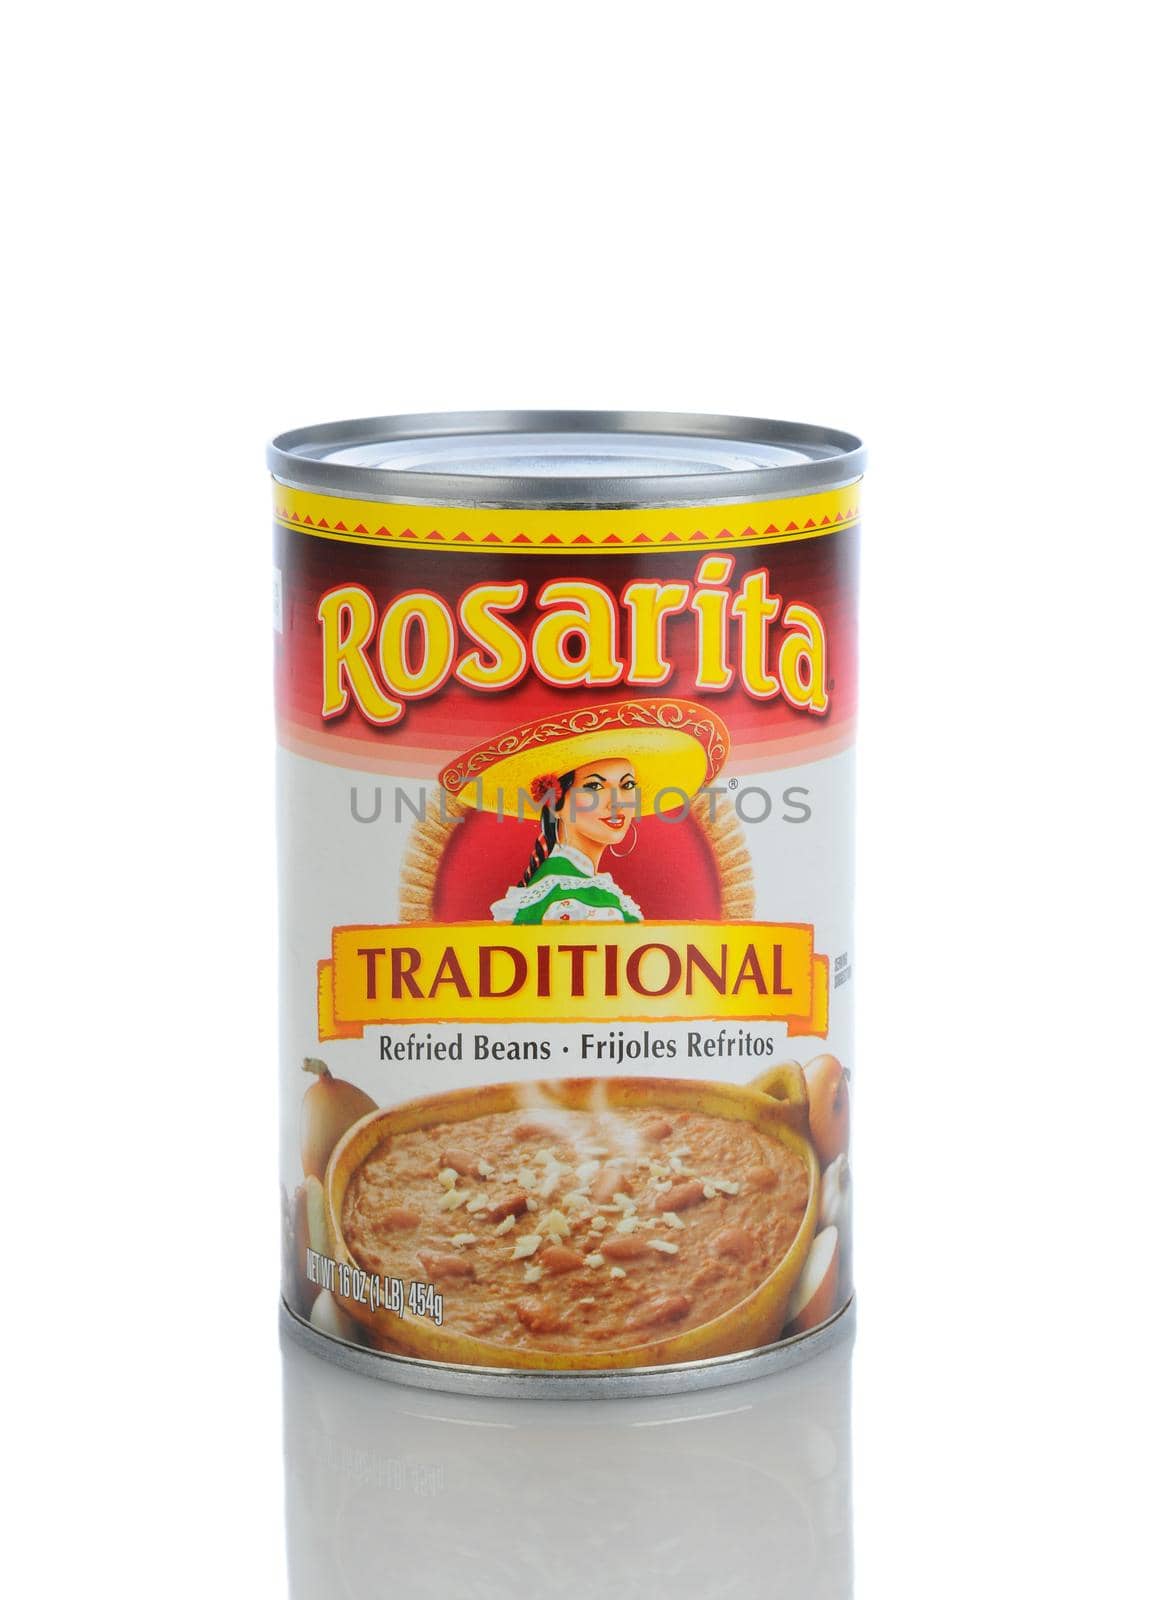 IRVINE, CA - January 11, 2013: A 16 oz. can of Rosarita Traditional Refried Beans. Rosita Mexican Food Products was founded in the 1940s, by Pedro Guerrero of Arizona.